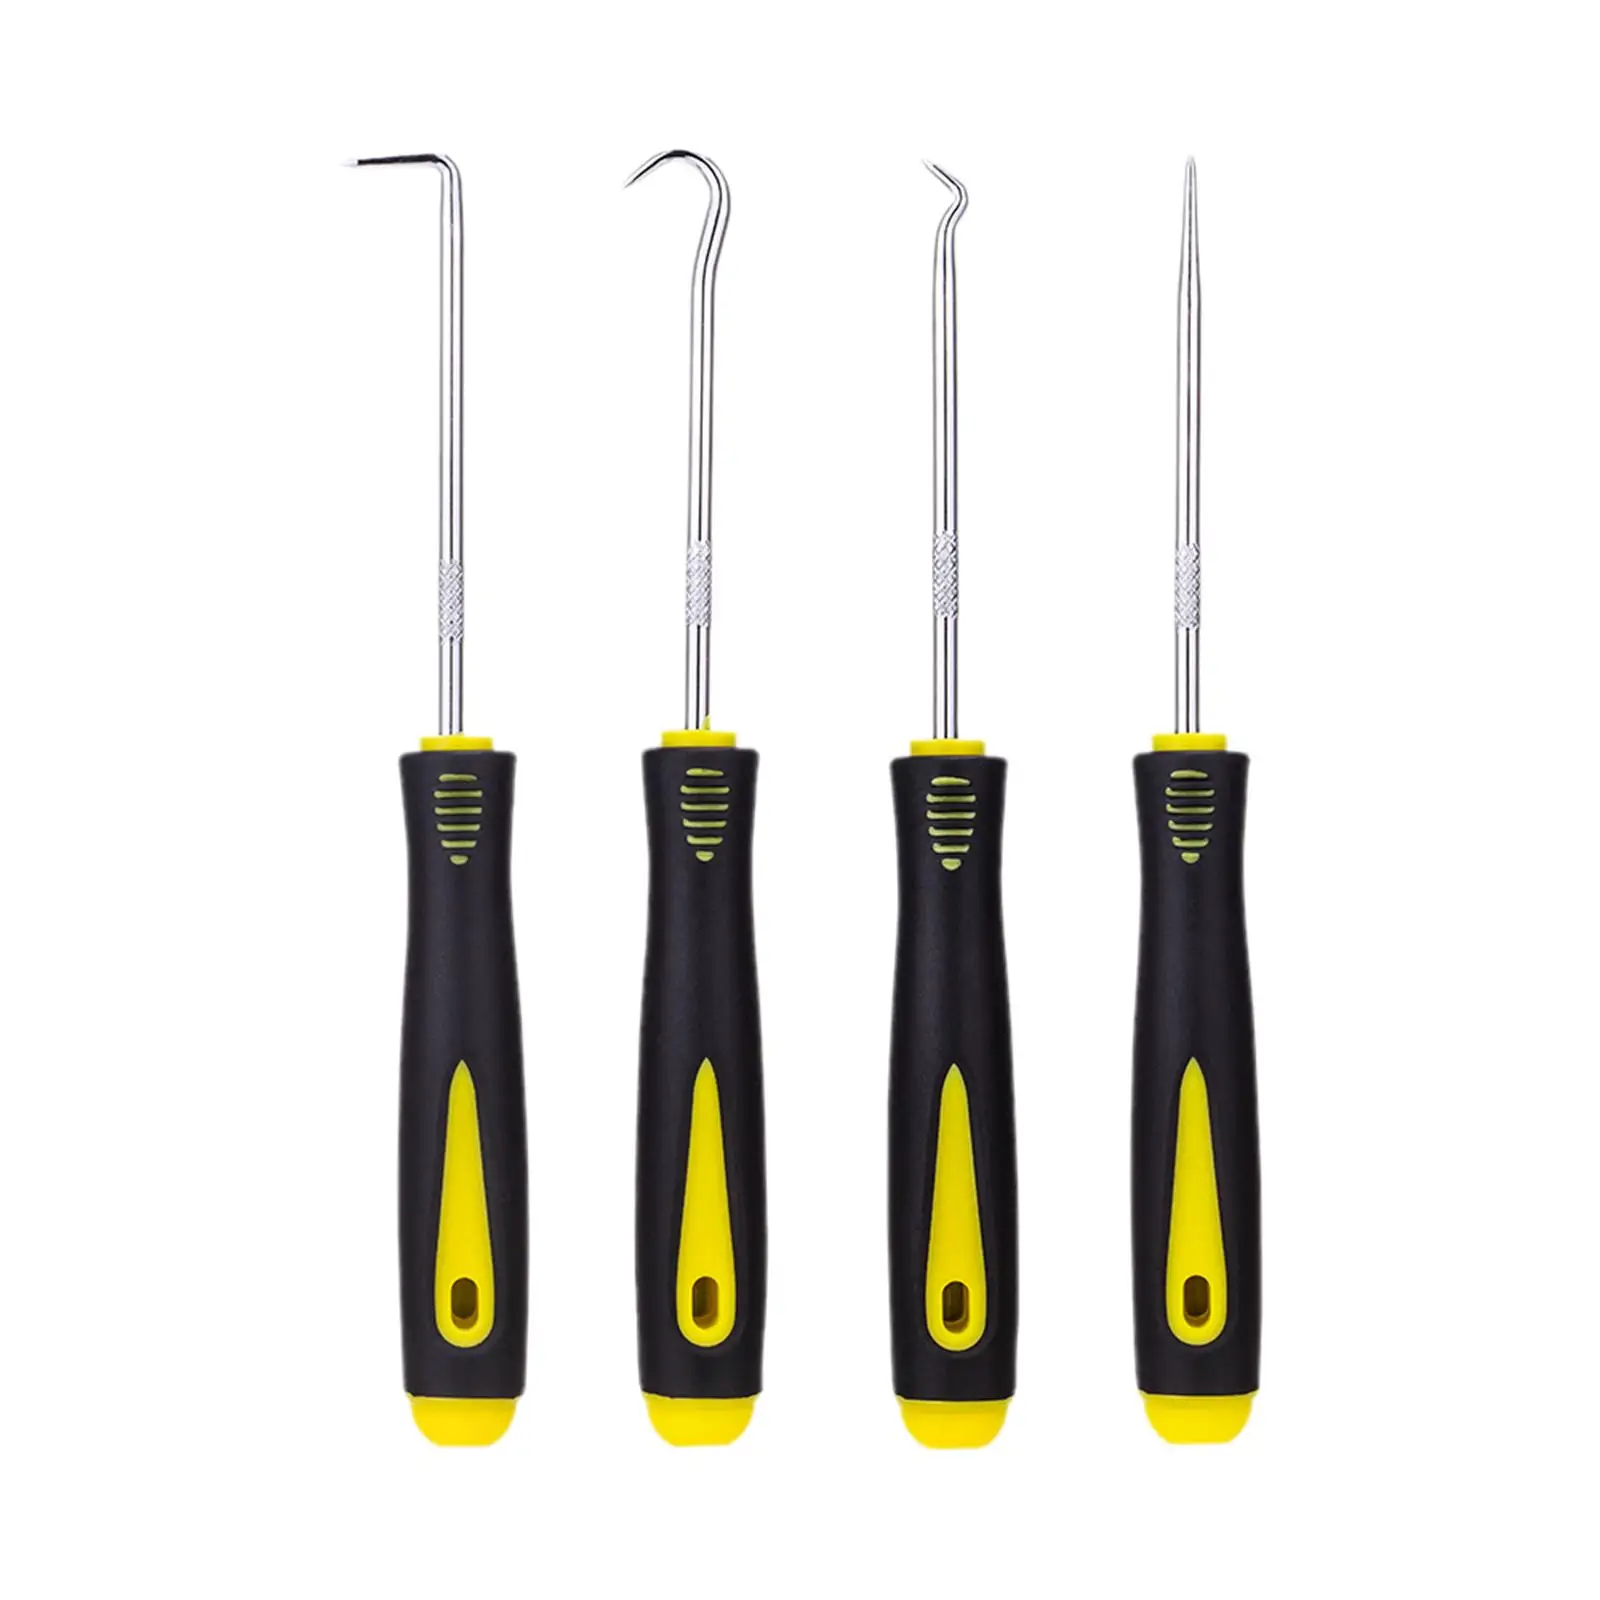 4-Piece Precision Hook and Pick Tool  Hose Gasket Pick Cotter   Tool